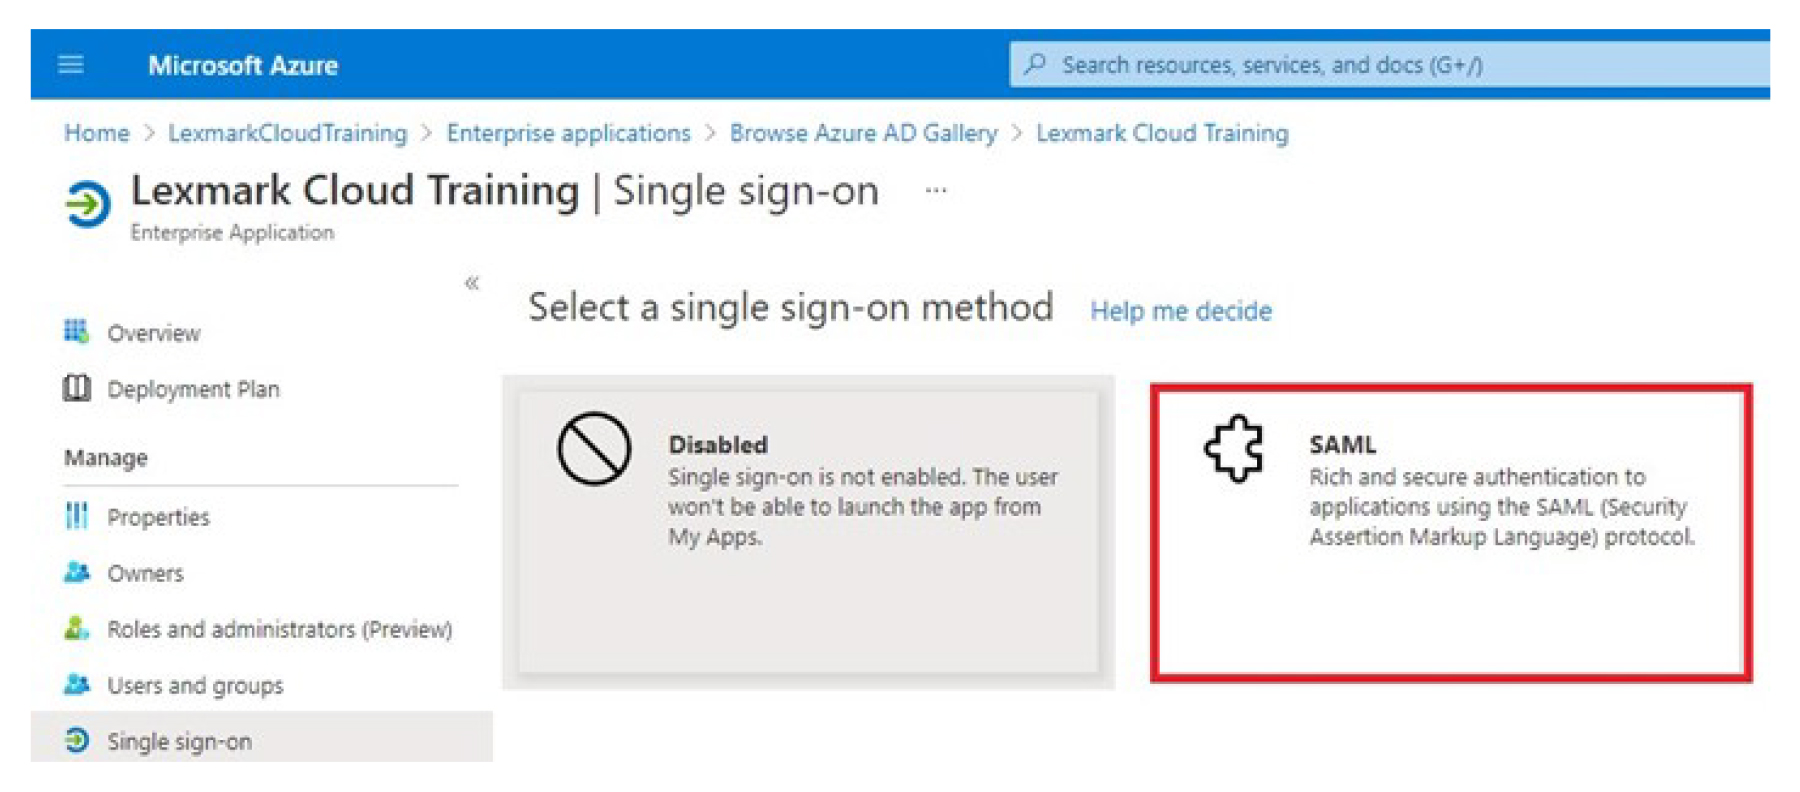 A screnshot showing SAML as the single sign-on method.